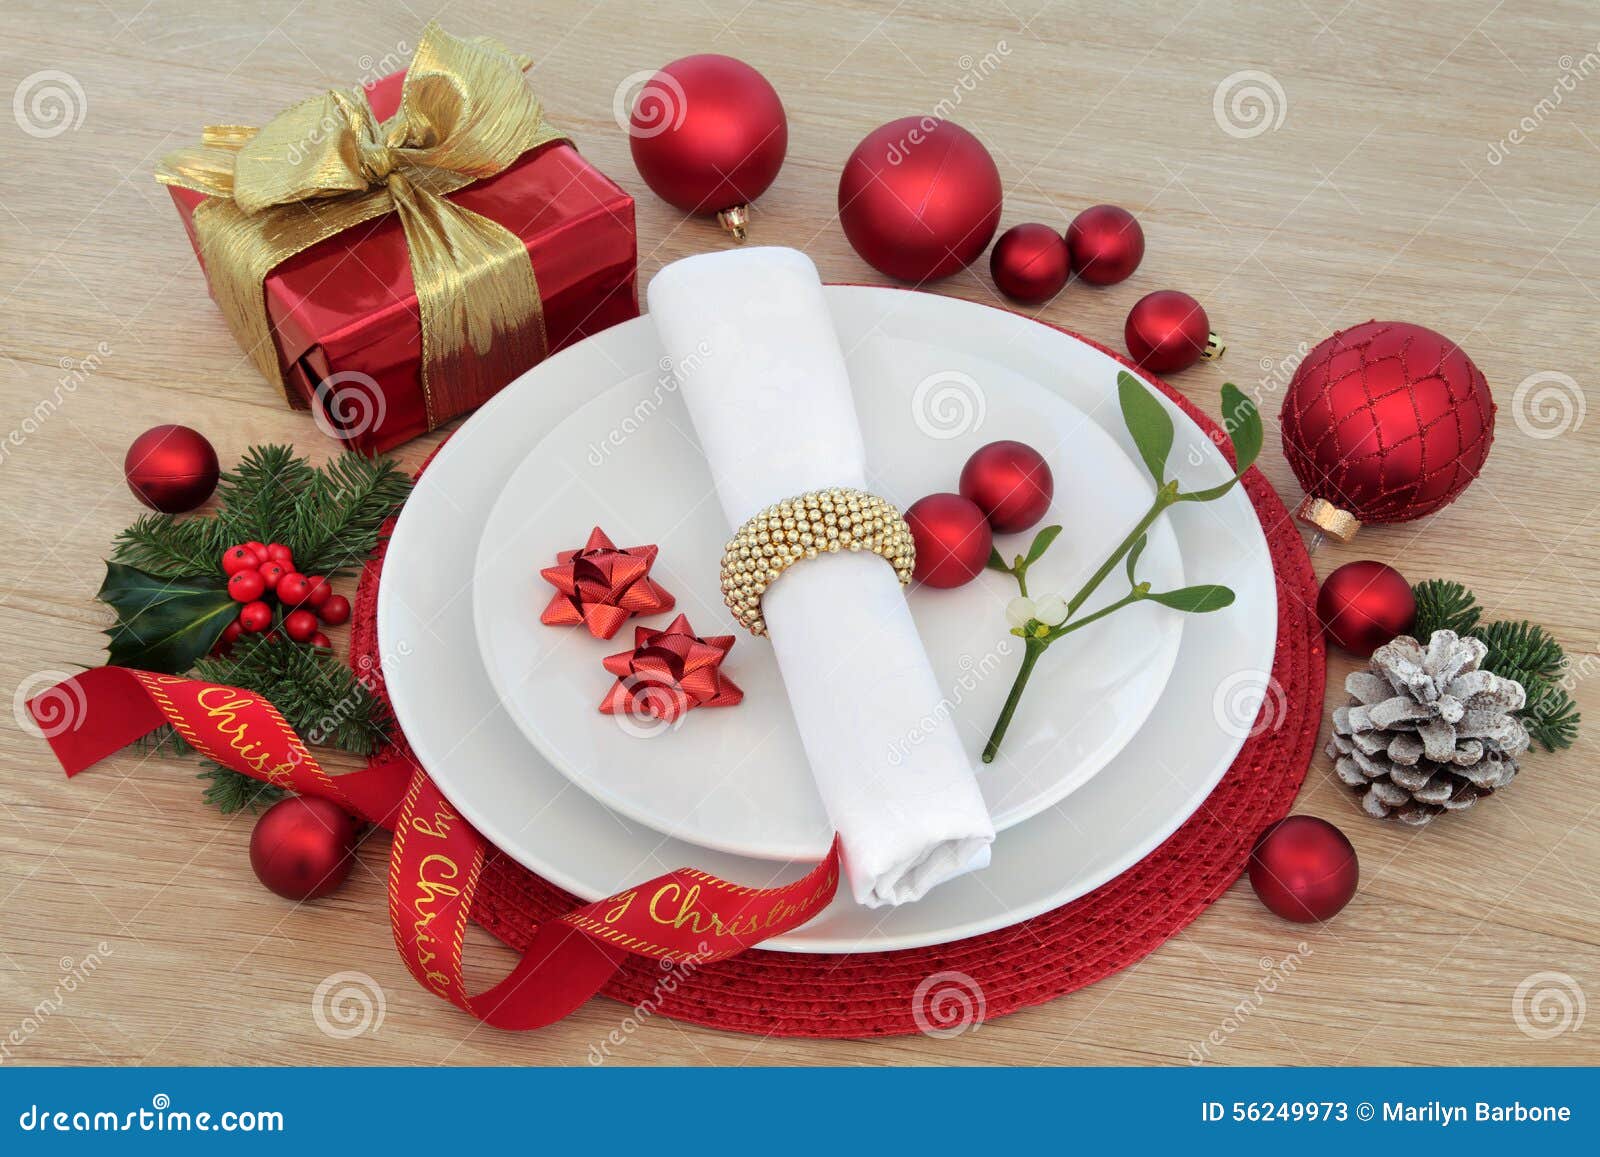 Merry Christmas stock image. Image of place, ring, holiday - 56249973